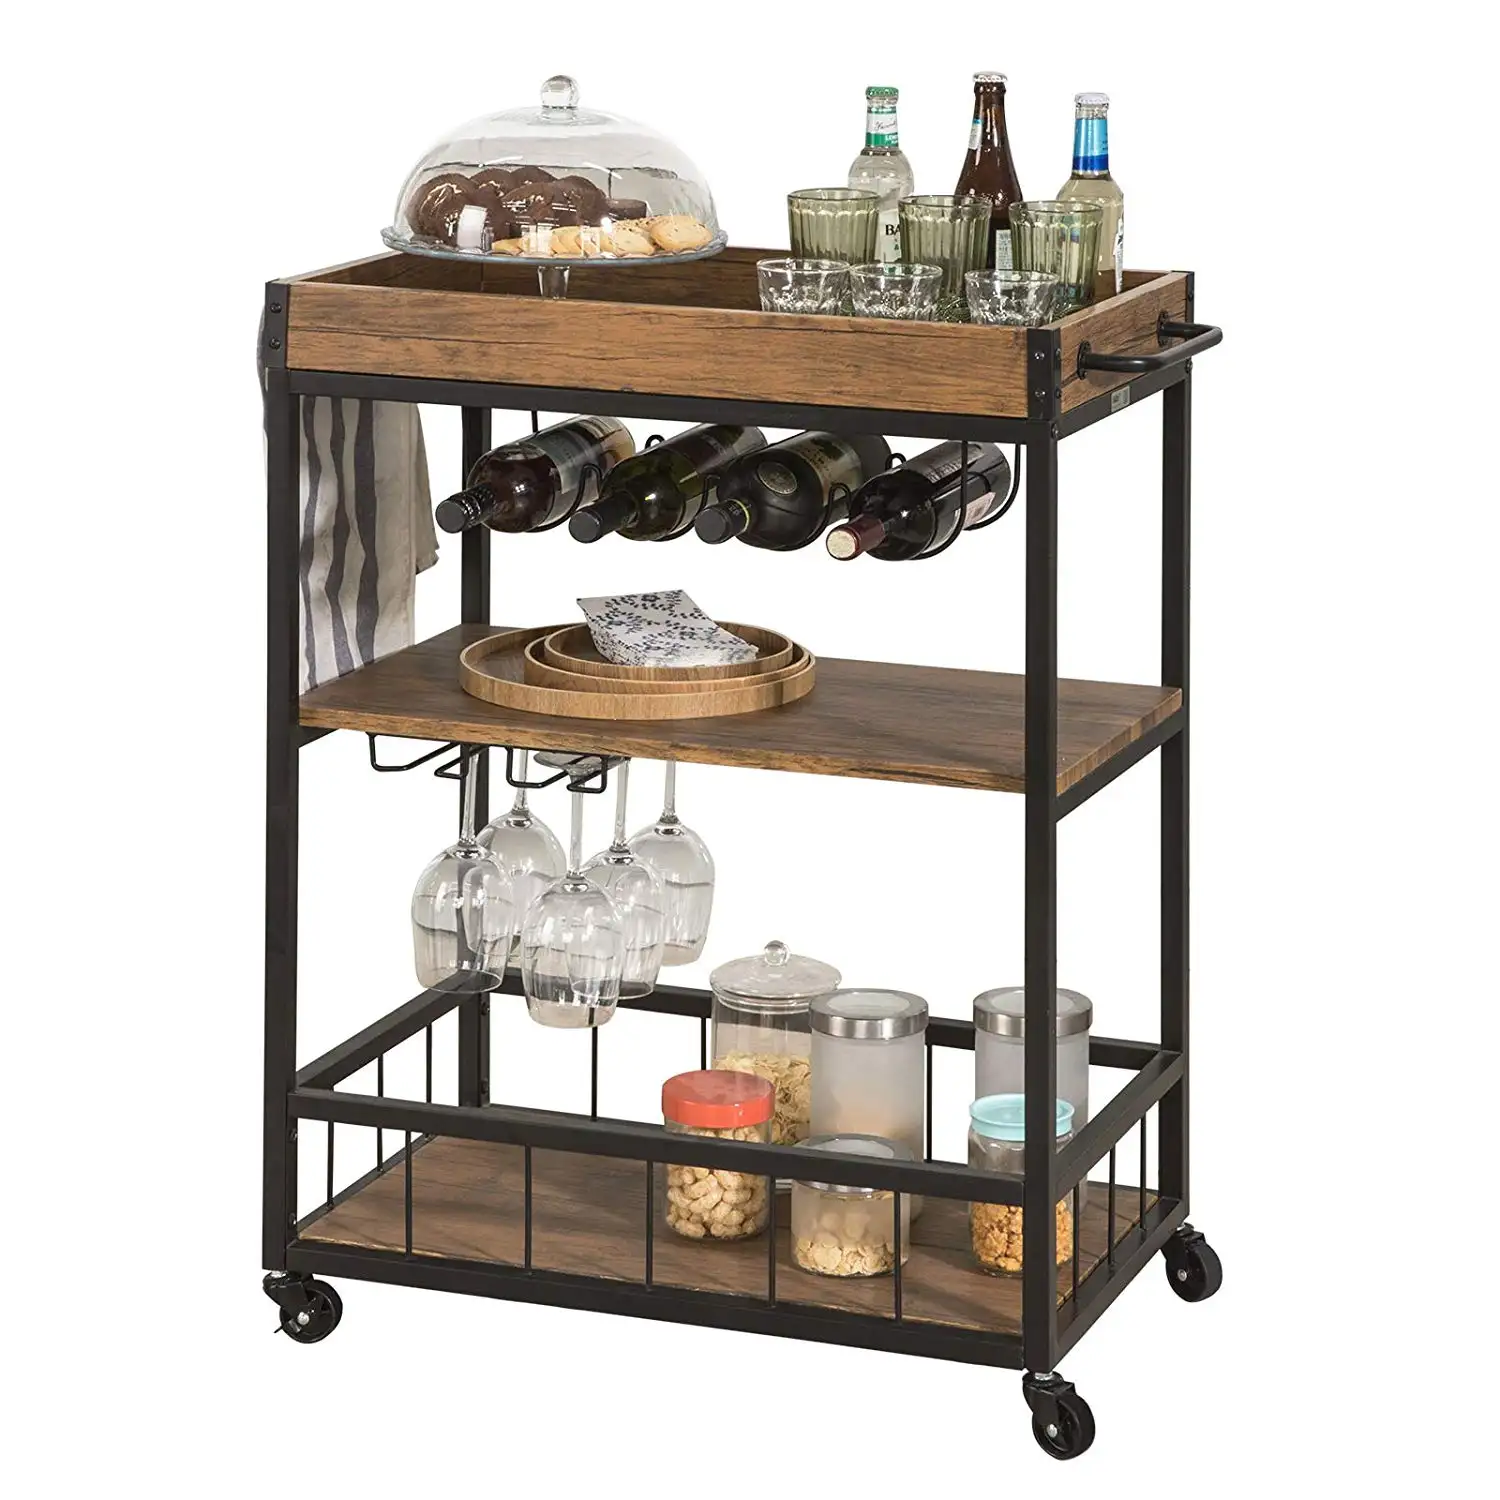 retro rustic 3 tiers mdf top wooden metal kitchen rack storage island trolley bar cart with wine rack tray handle cup holder